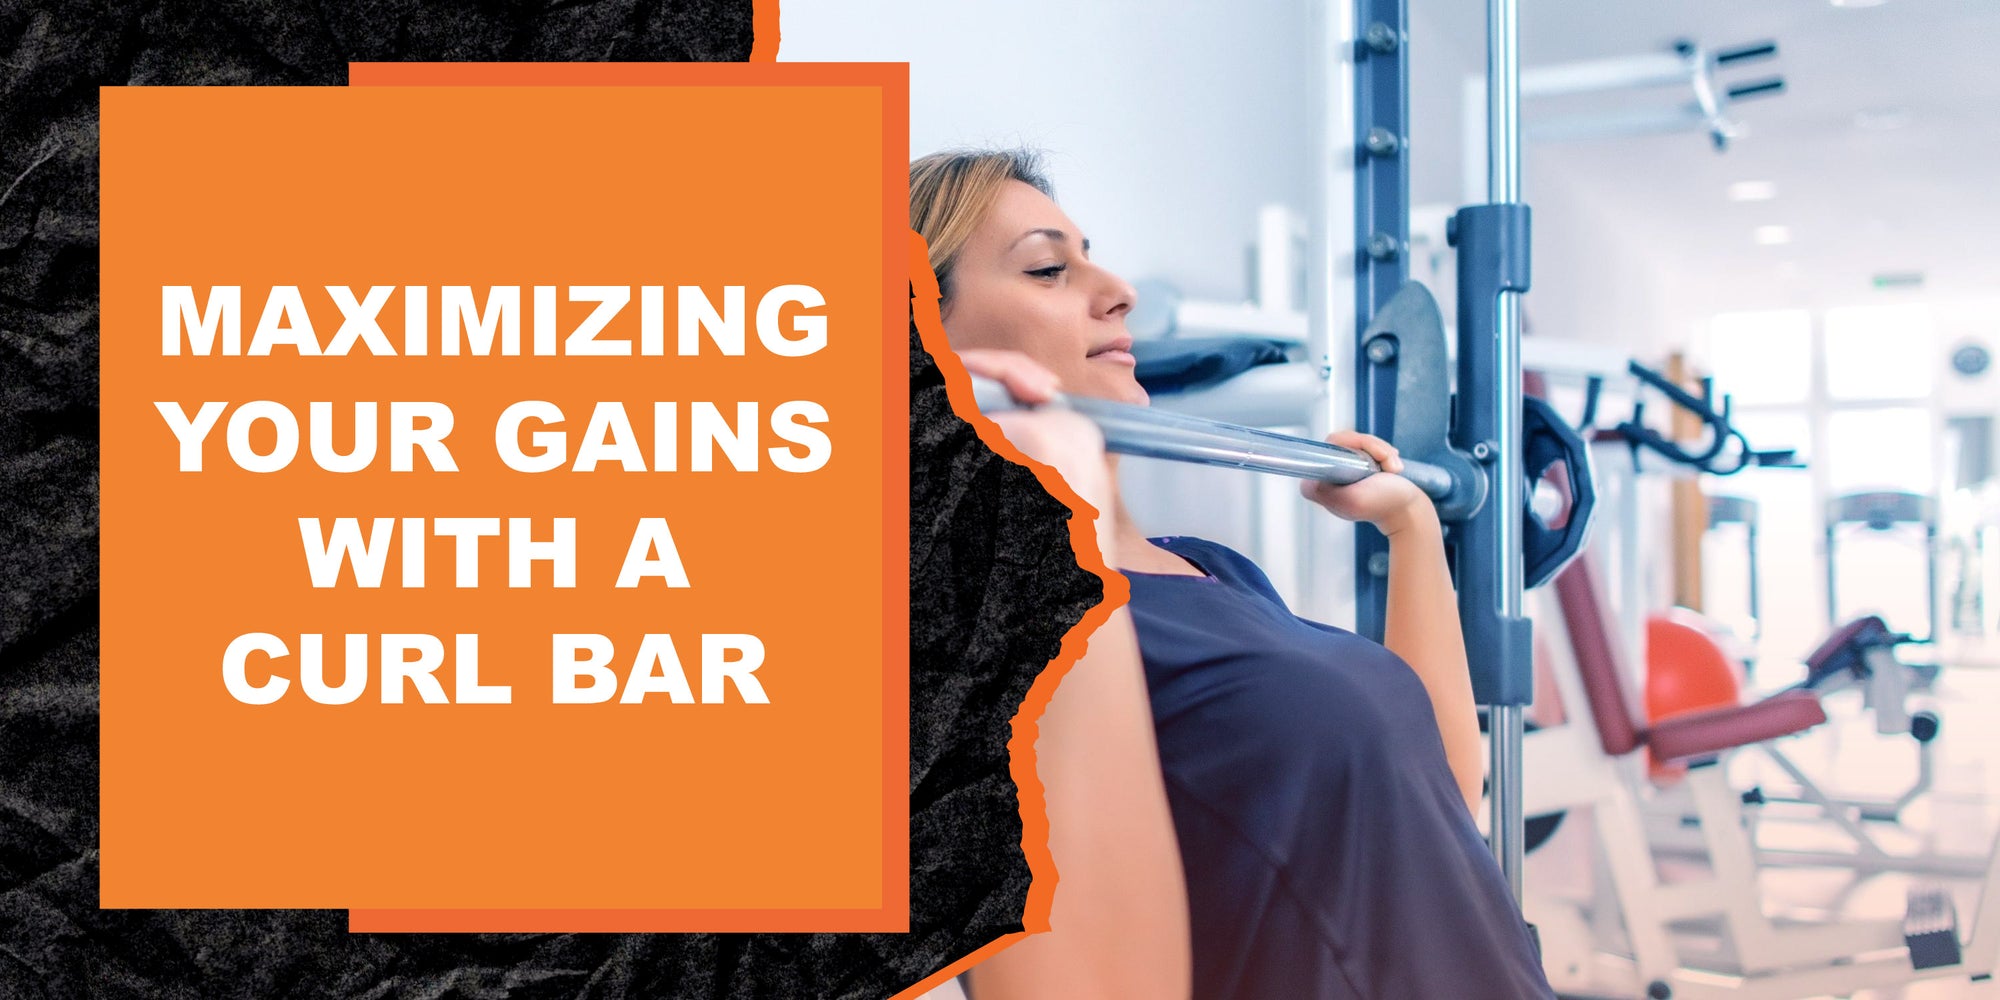 Maximizing Your Gains with a Curl Bar